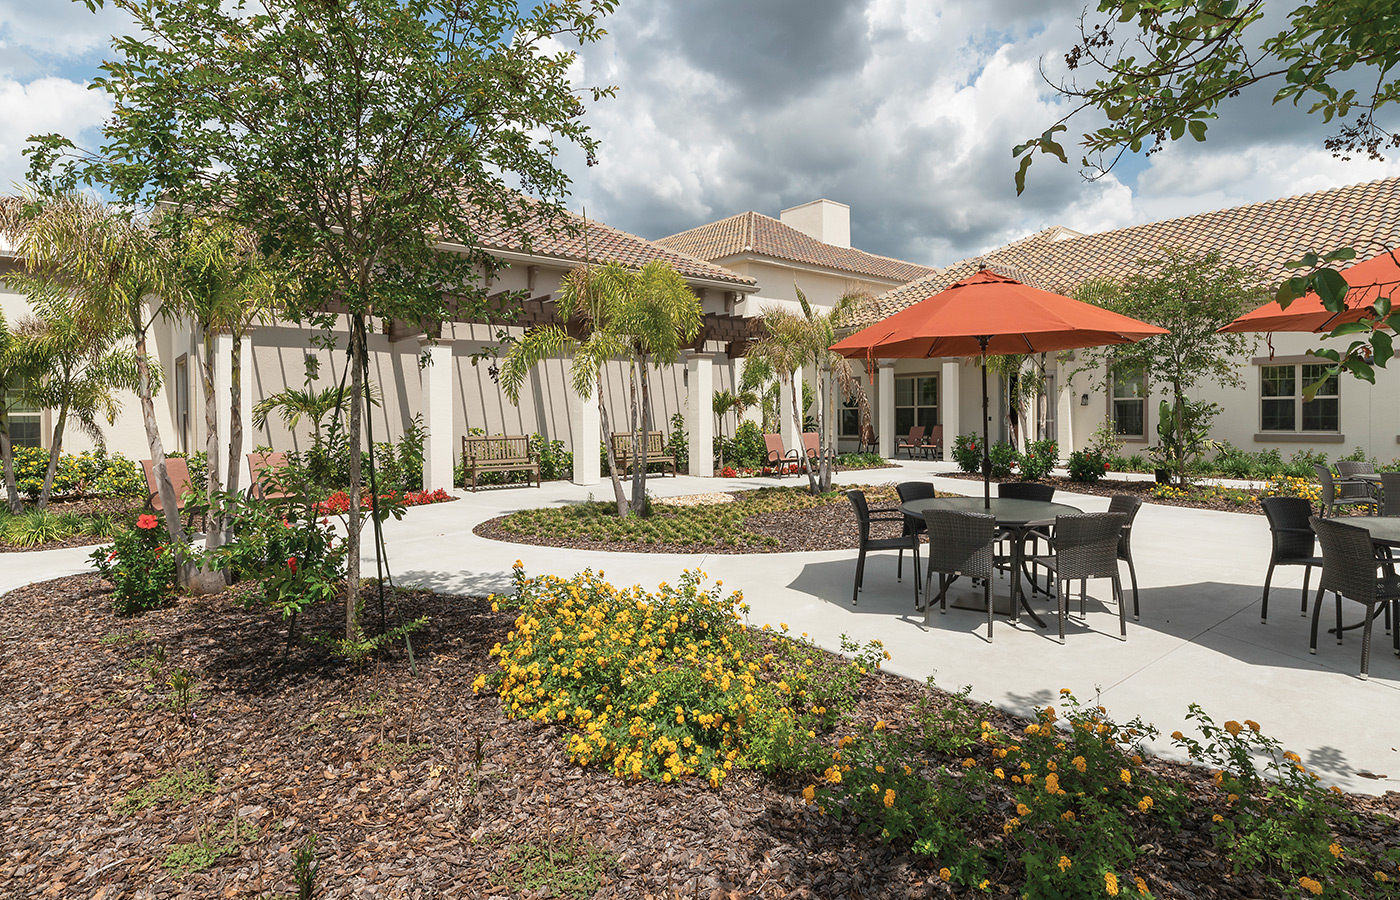 The Glades at ChampionsGate exterior building and courtyard.